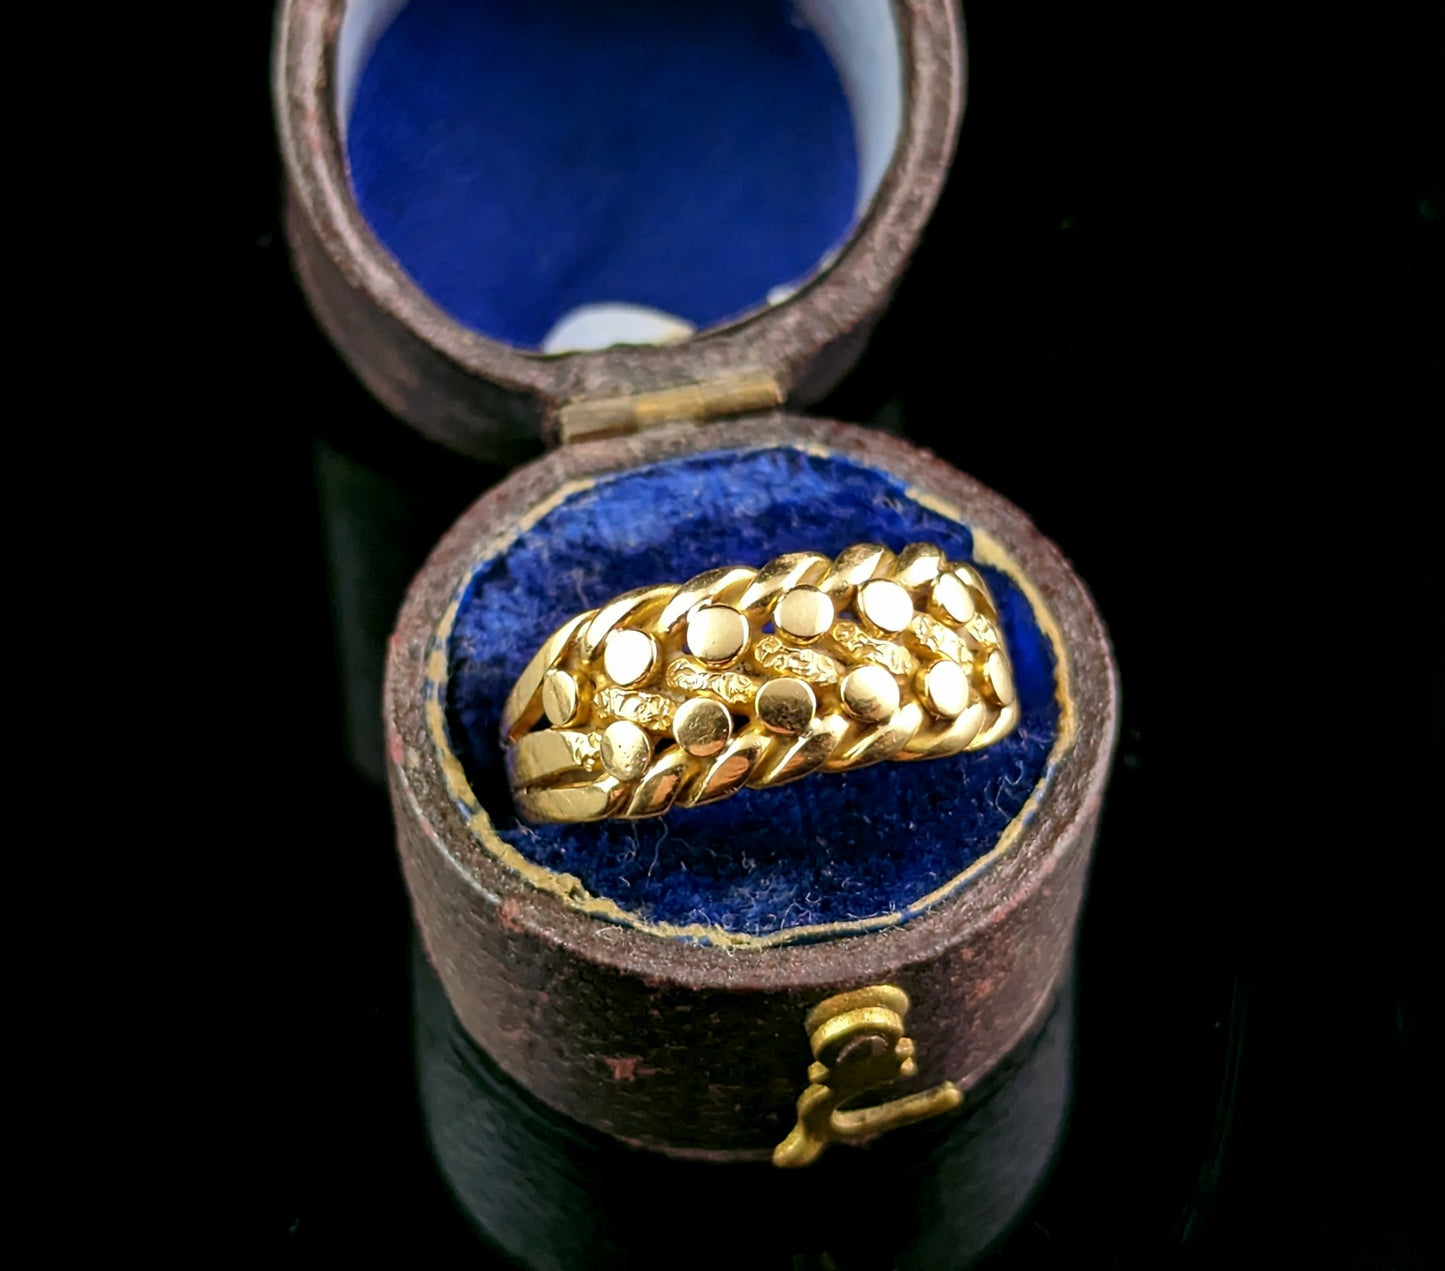 Antique Victorian 18ct gold keeper ring